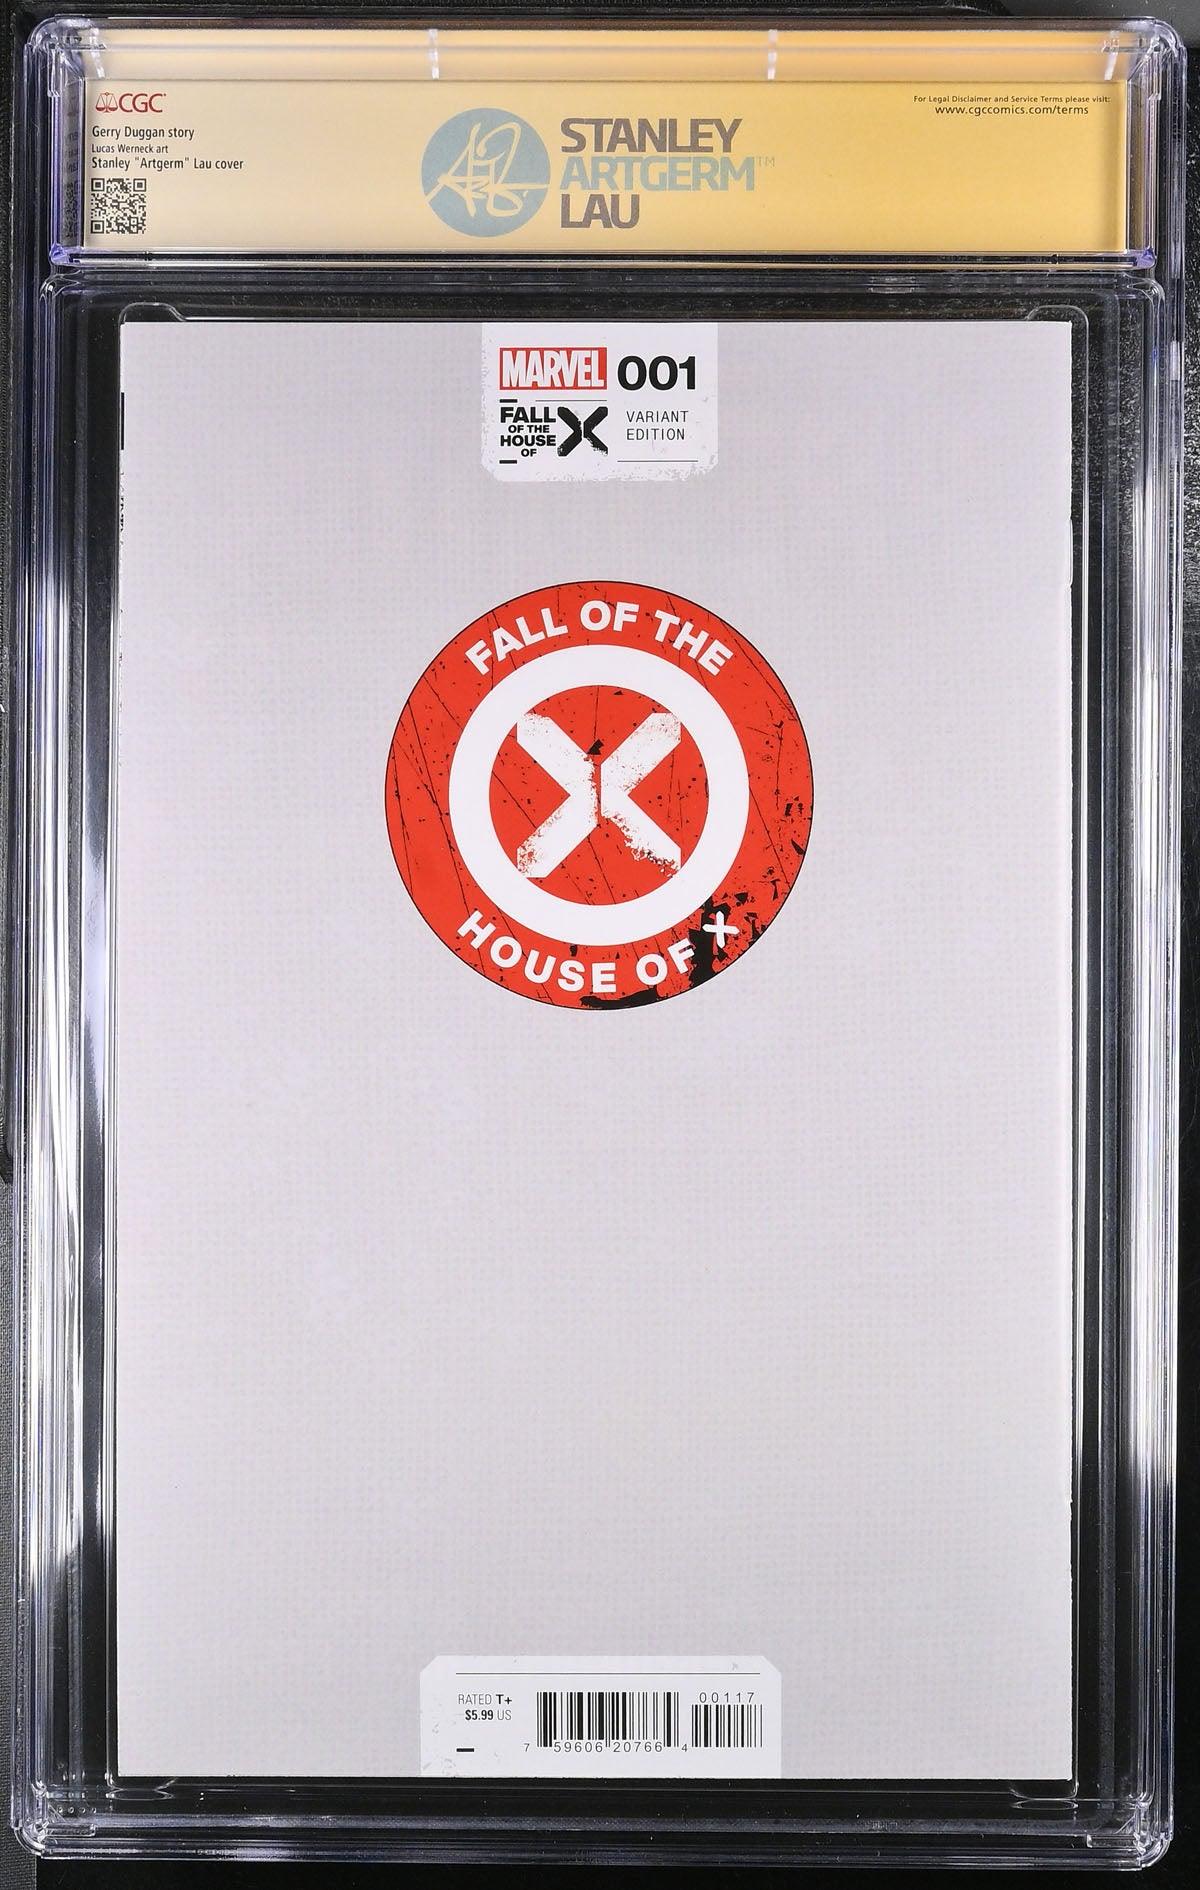 CGC FALL OF THE HOUSE OF X #1 1:50 LAU "VIRGIN" EDITION (9.8) SIGNATURE SERIES - SIGNED BY STANLEY "ARTGERM" - Kings Comics